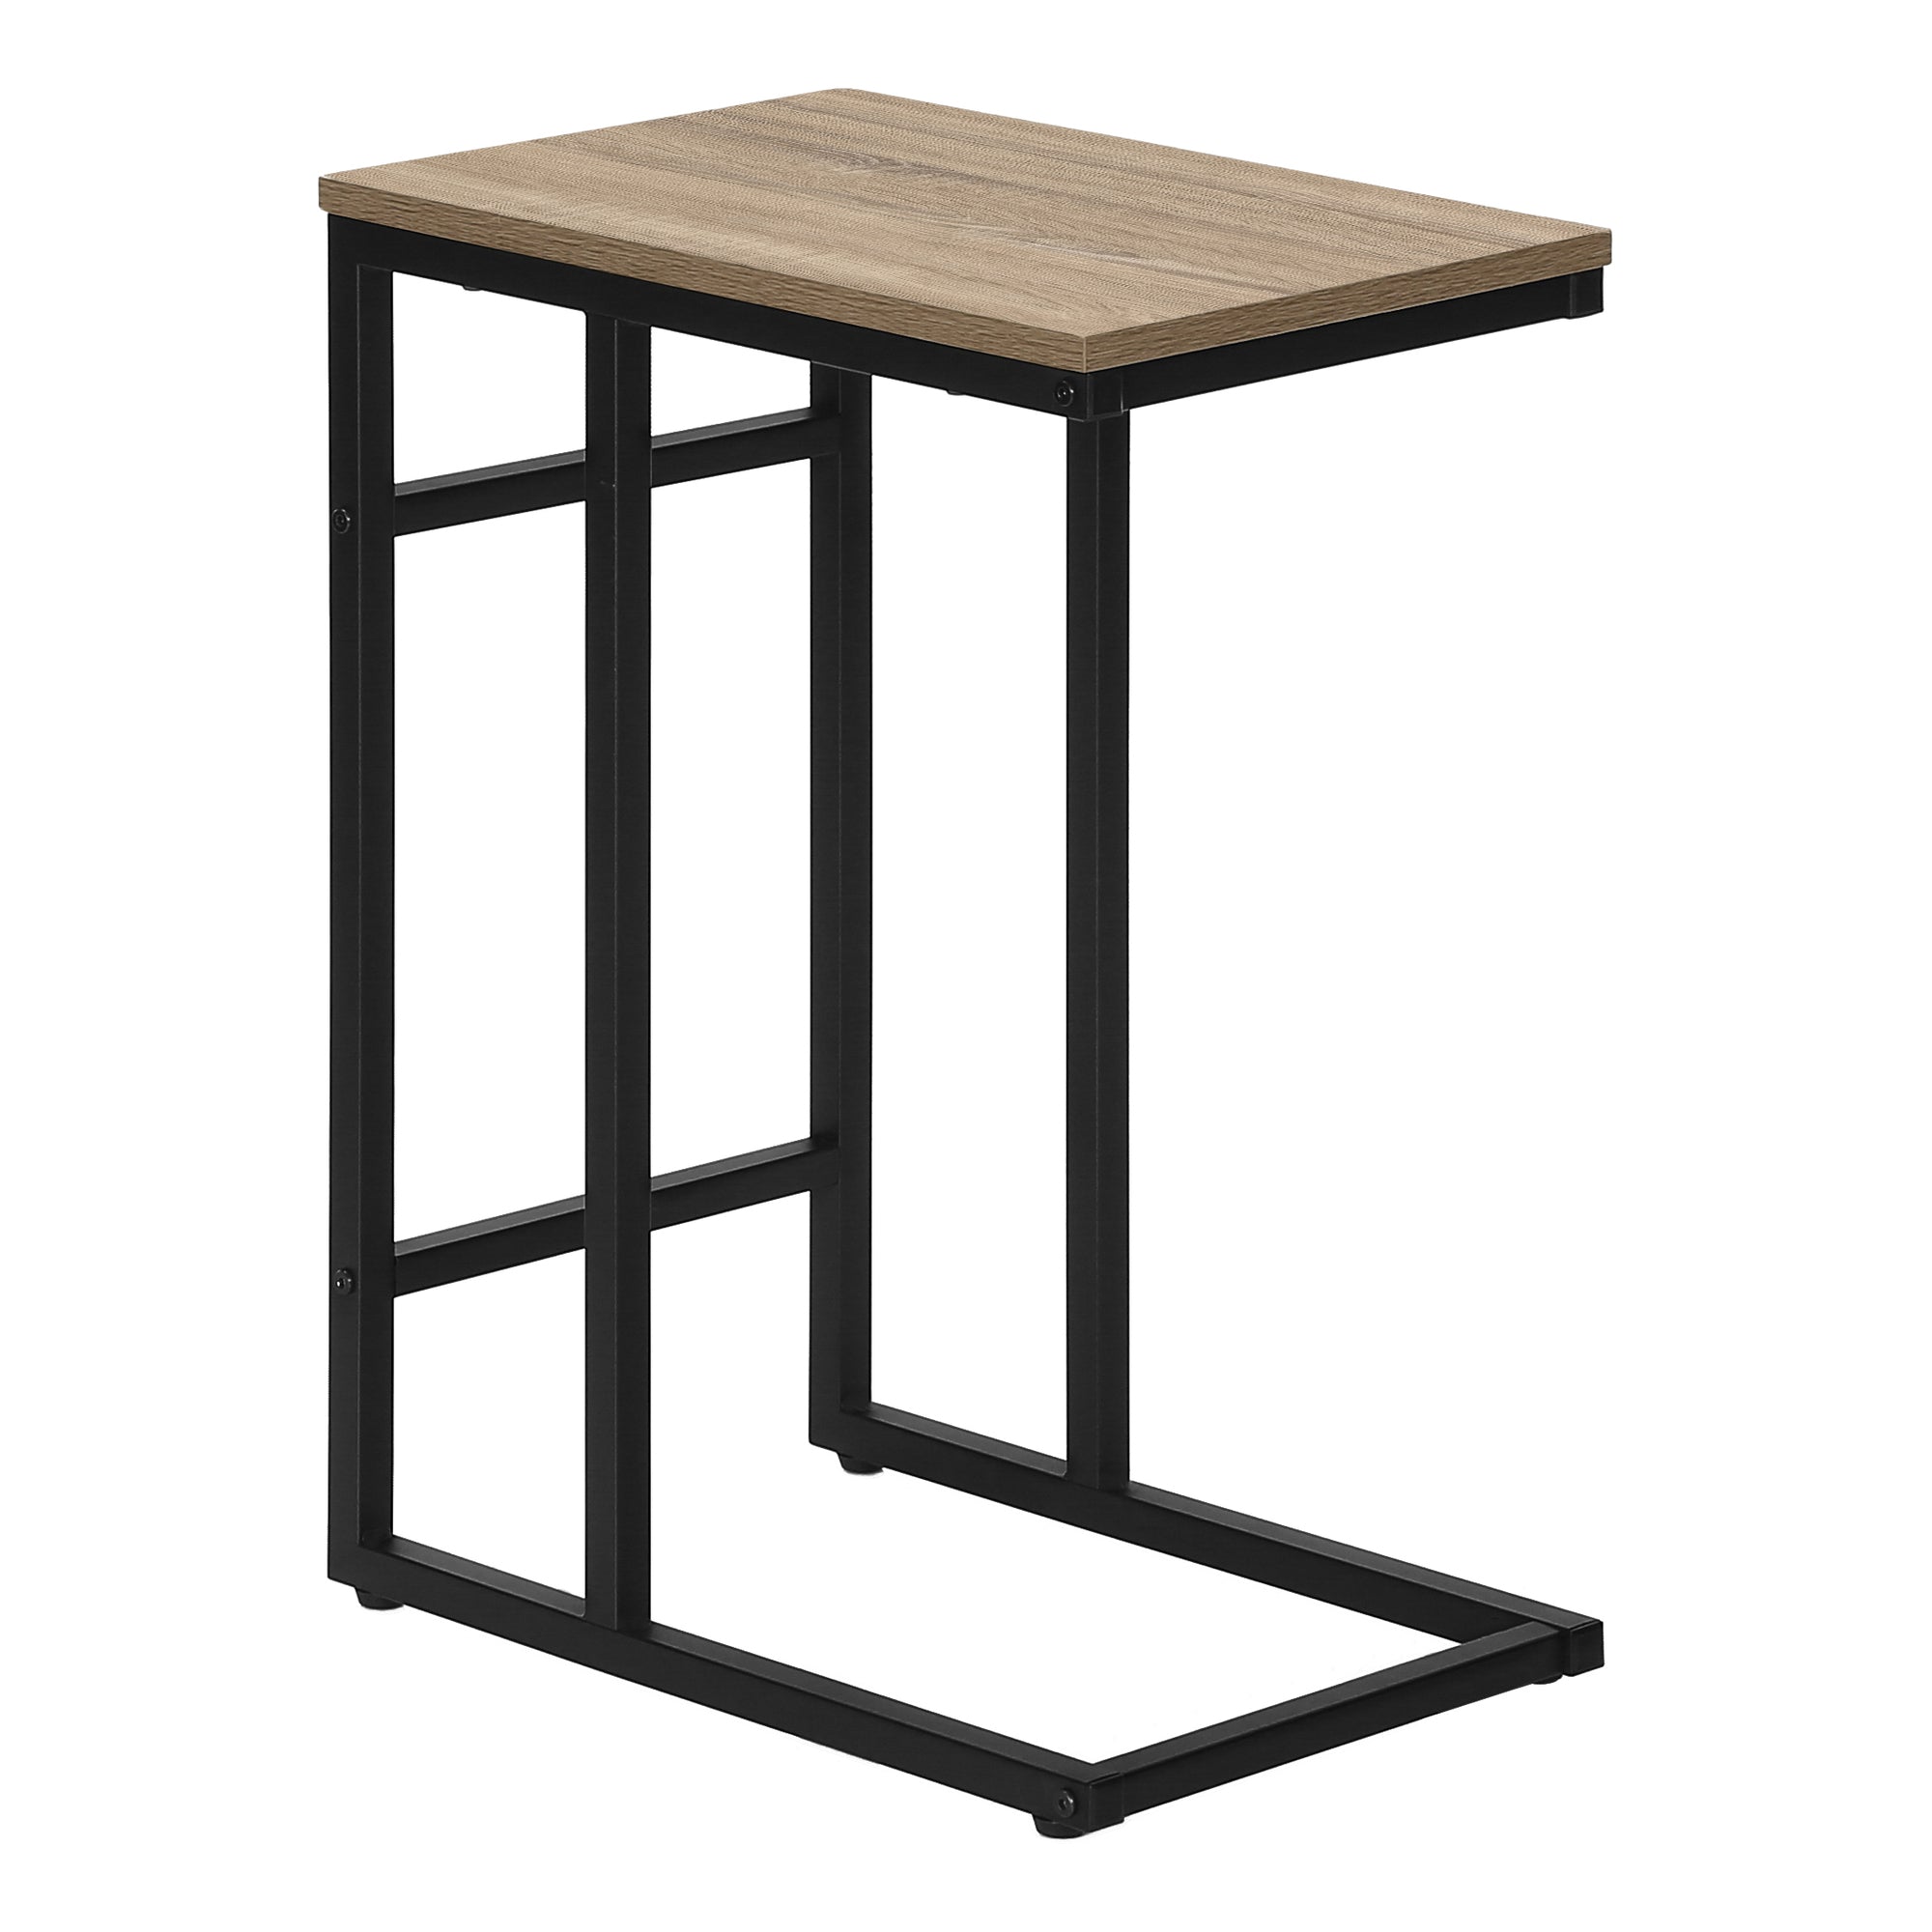 MN-392172    Accent Table - 24"H / Dark Taupe / Black Metal